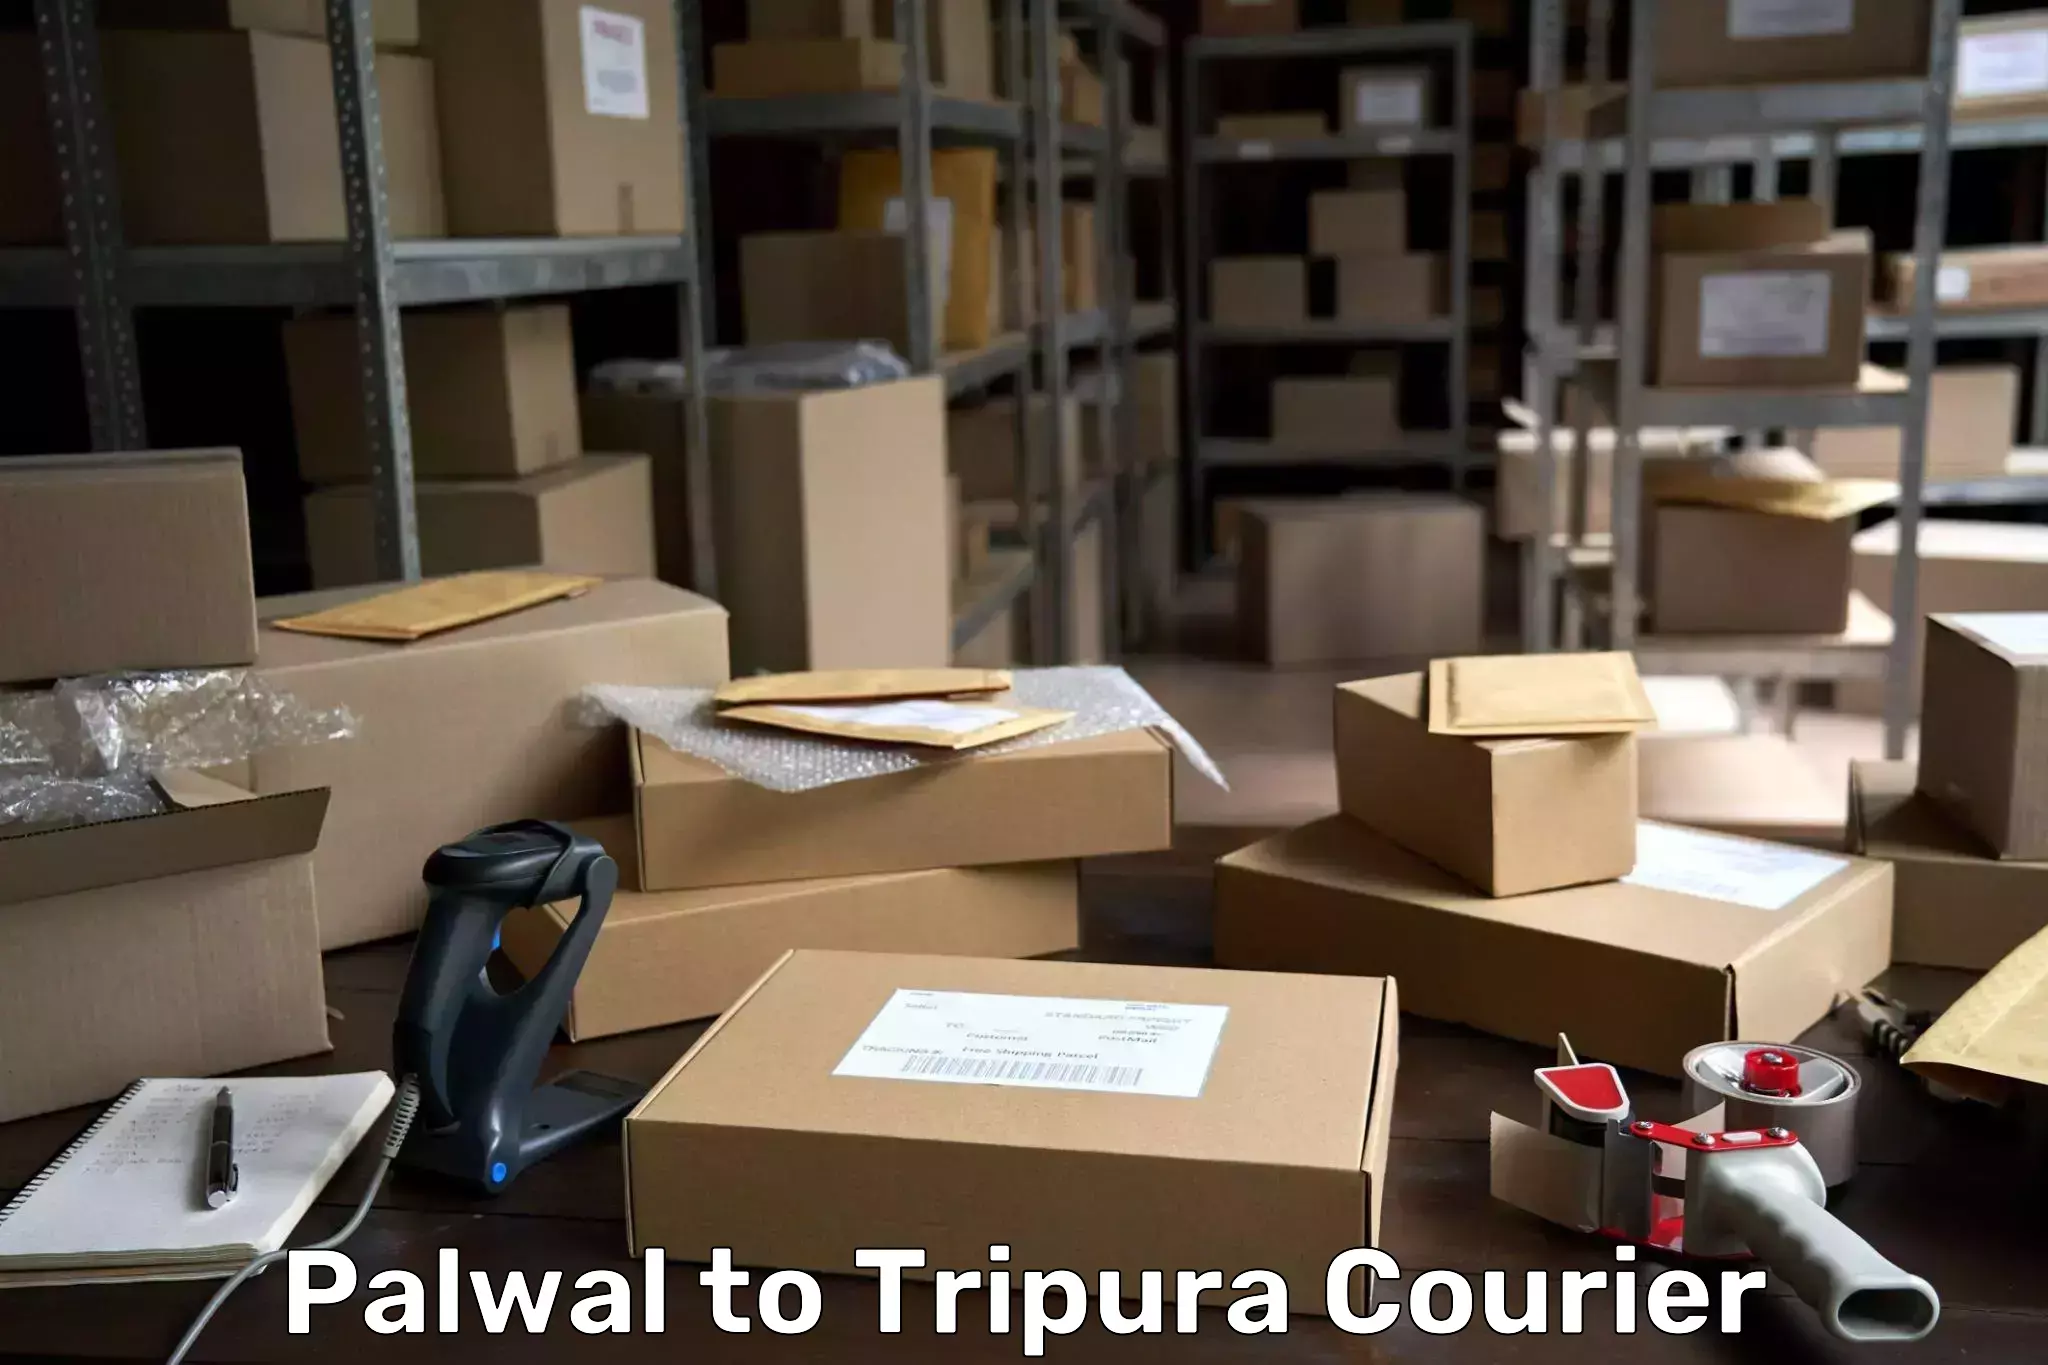 Sustainable delivery practices Palwal to Udaipur Tripura